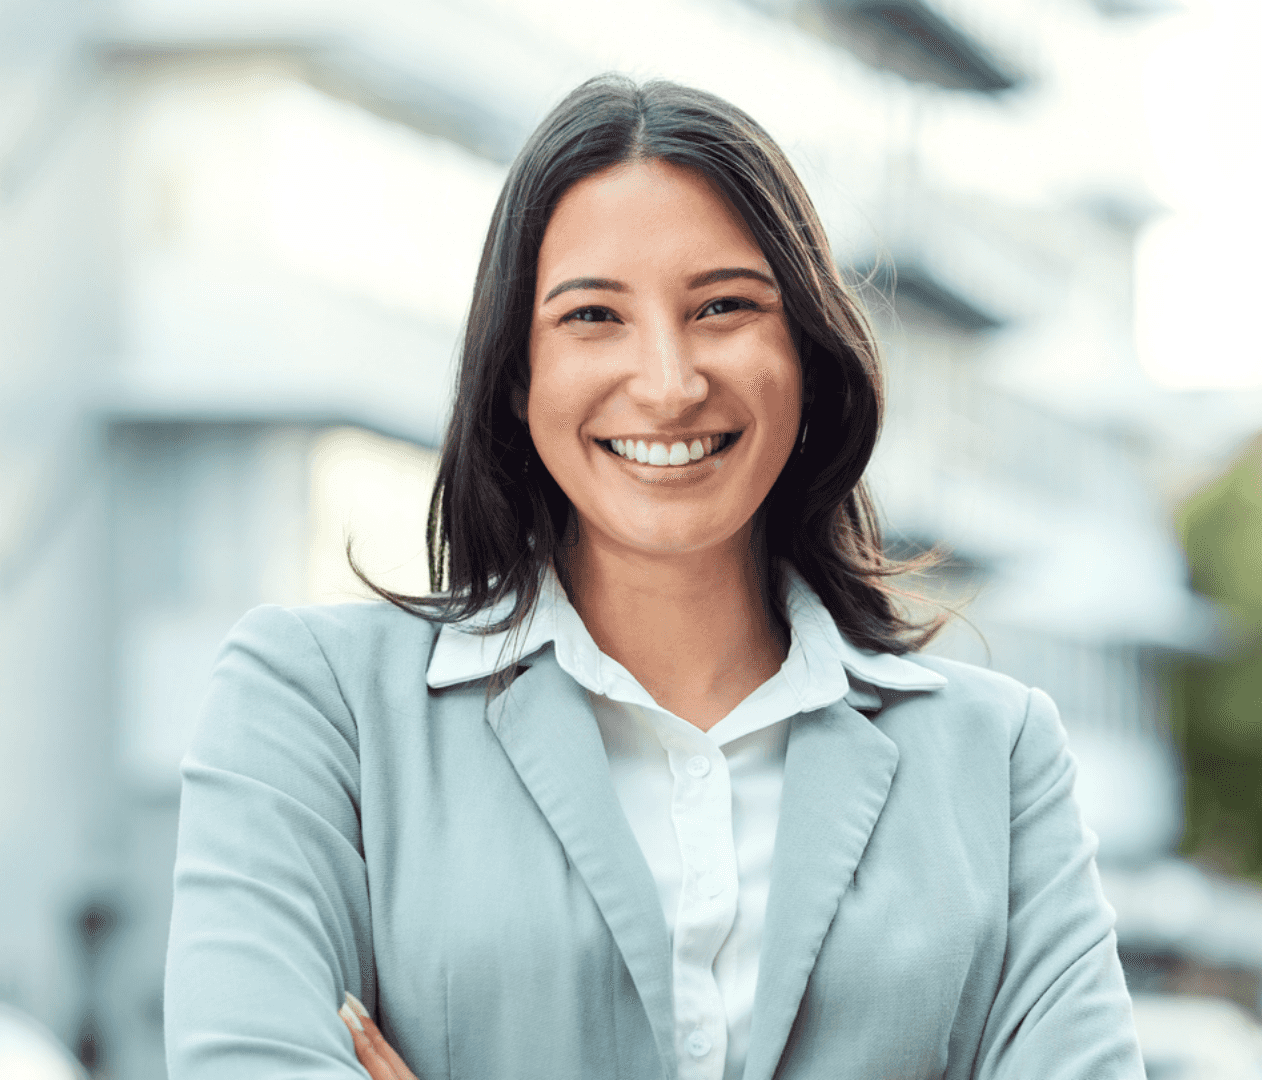 Woman smiling in a suit